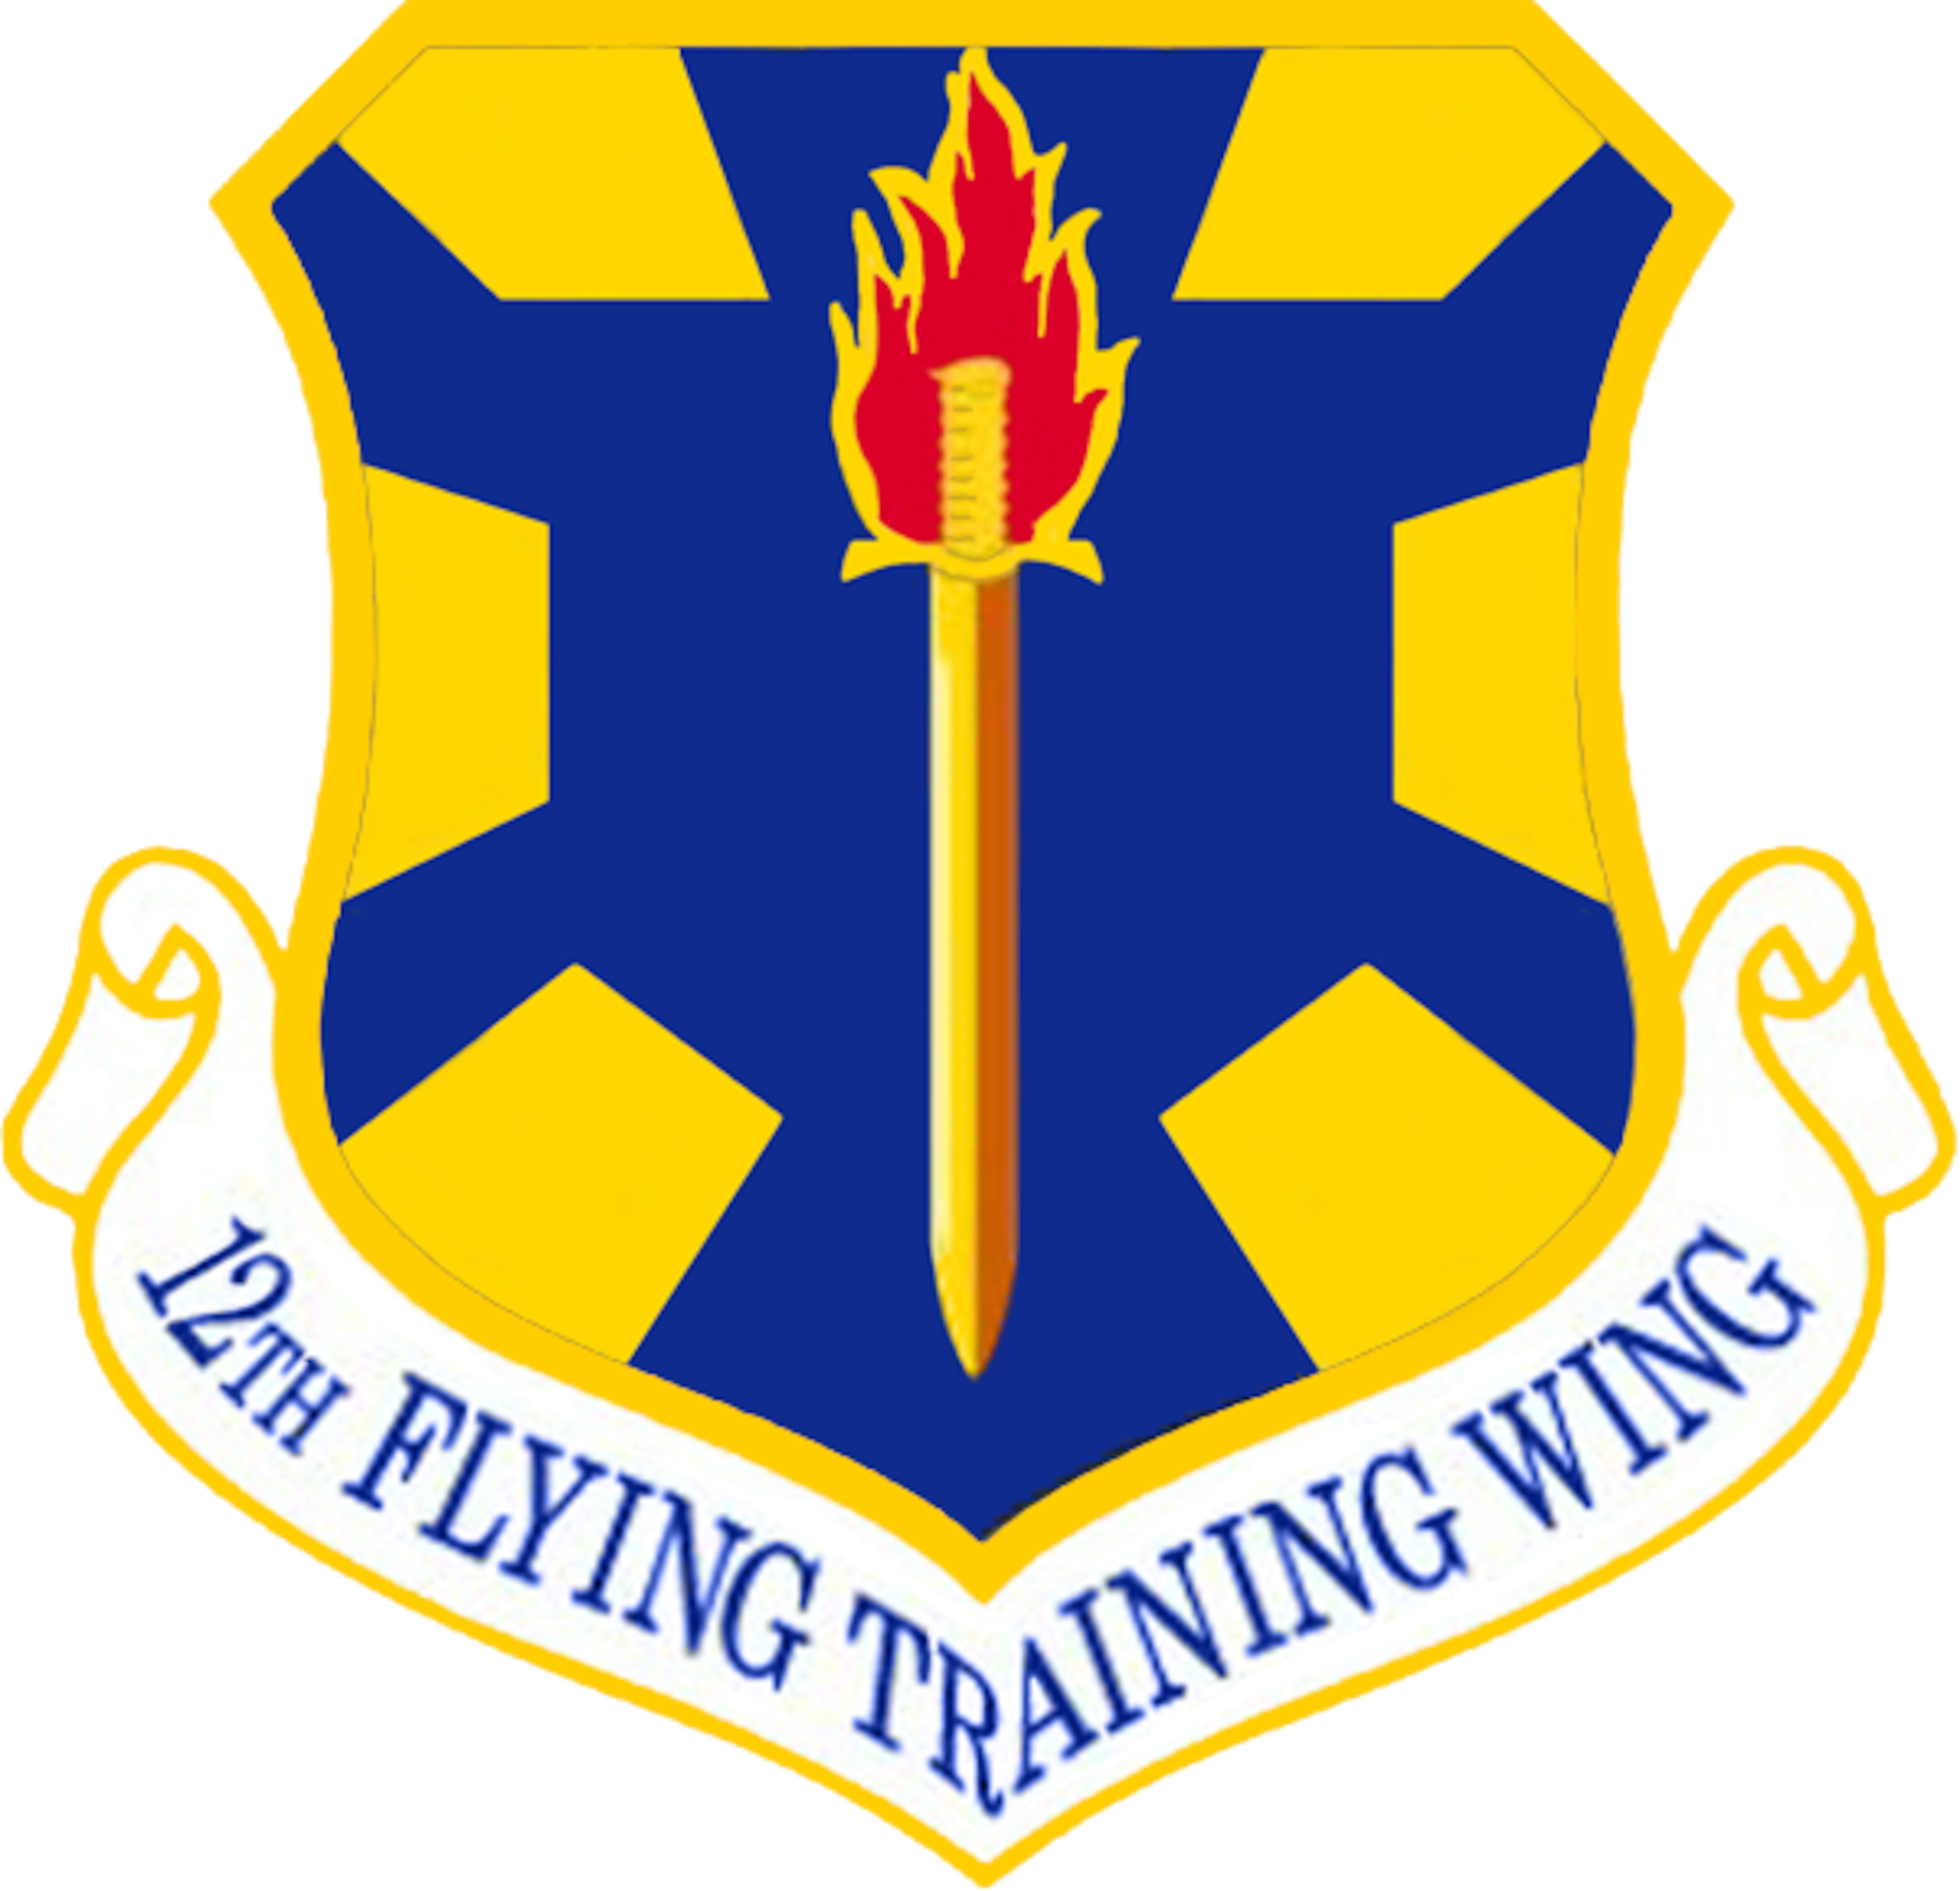 12th Flying Training Wing 1st and 2nd Quarter Award Winners